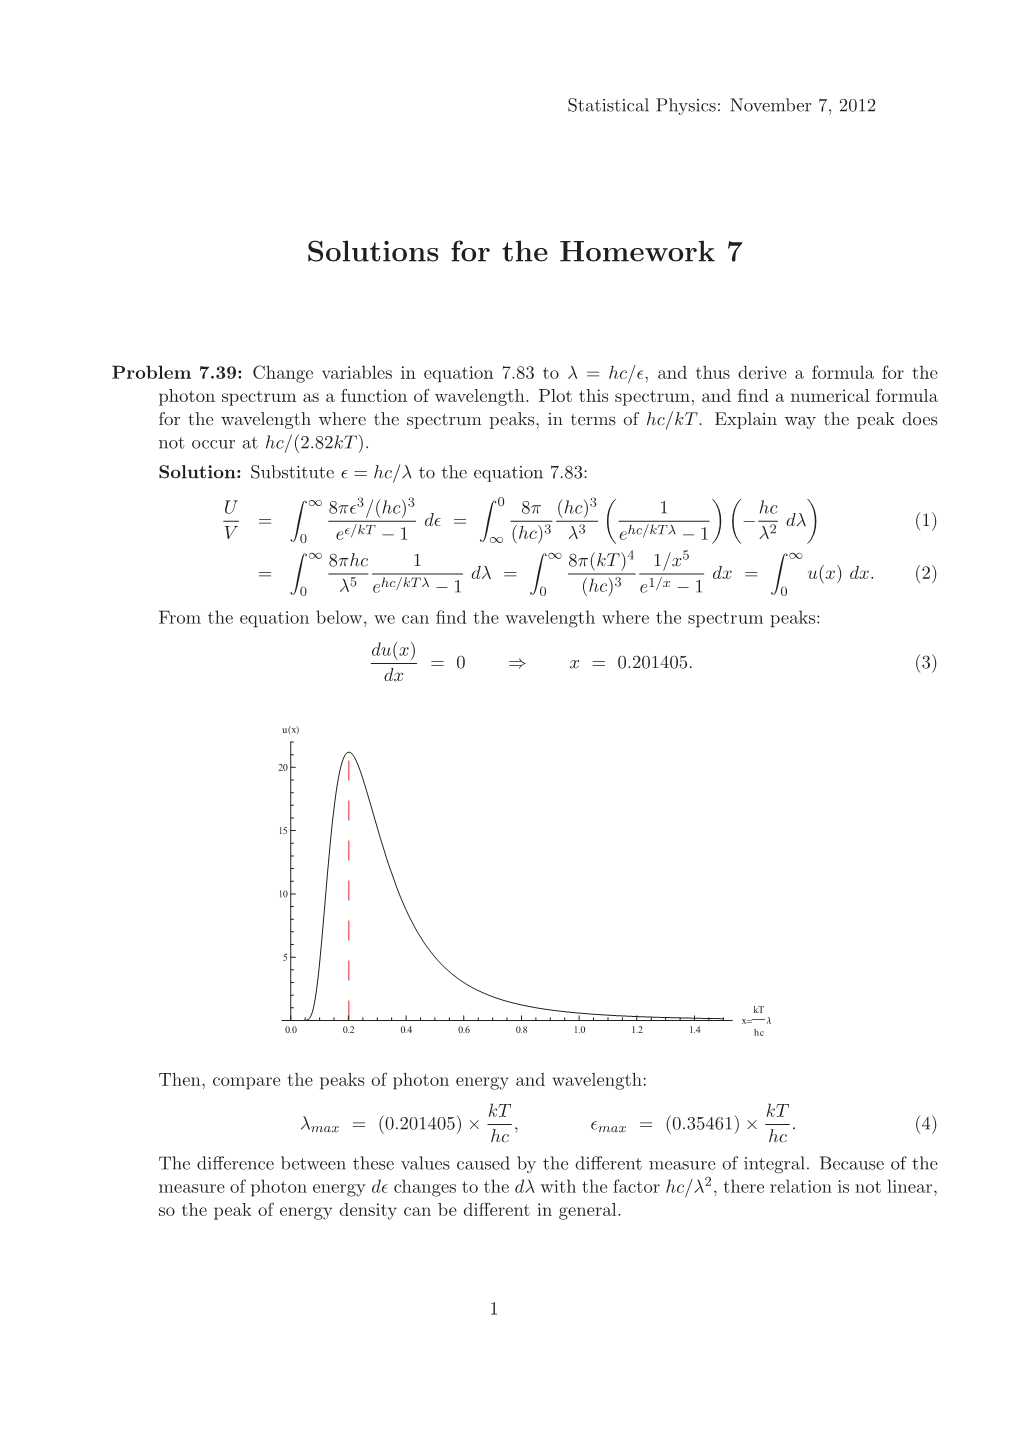 Solutions for the Homework 7